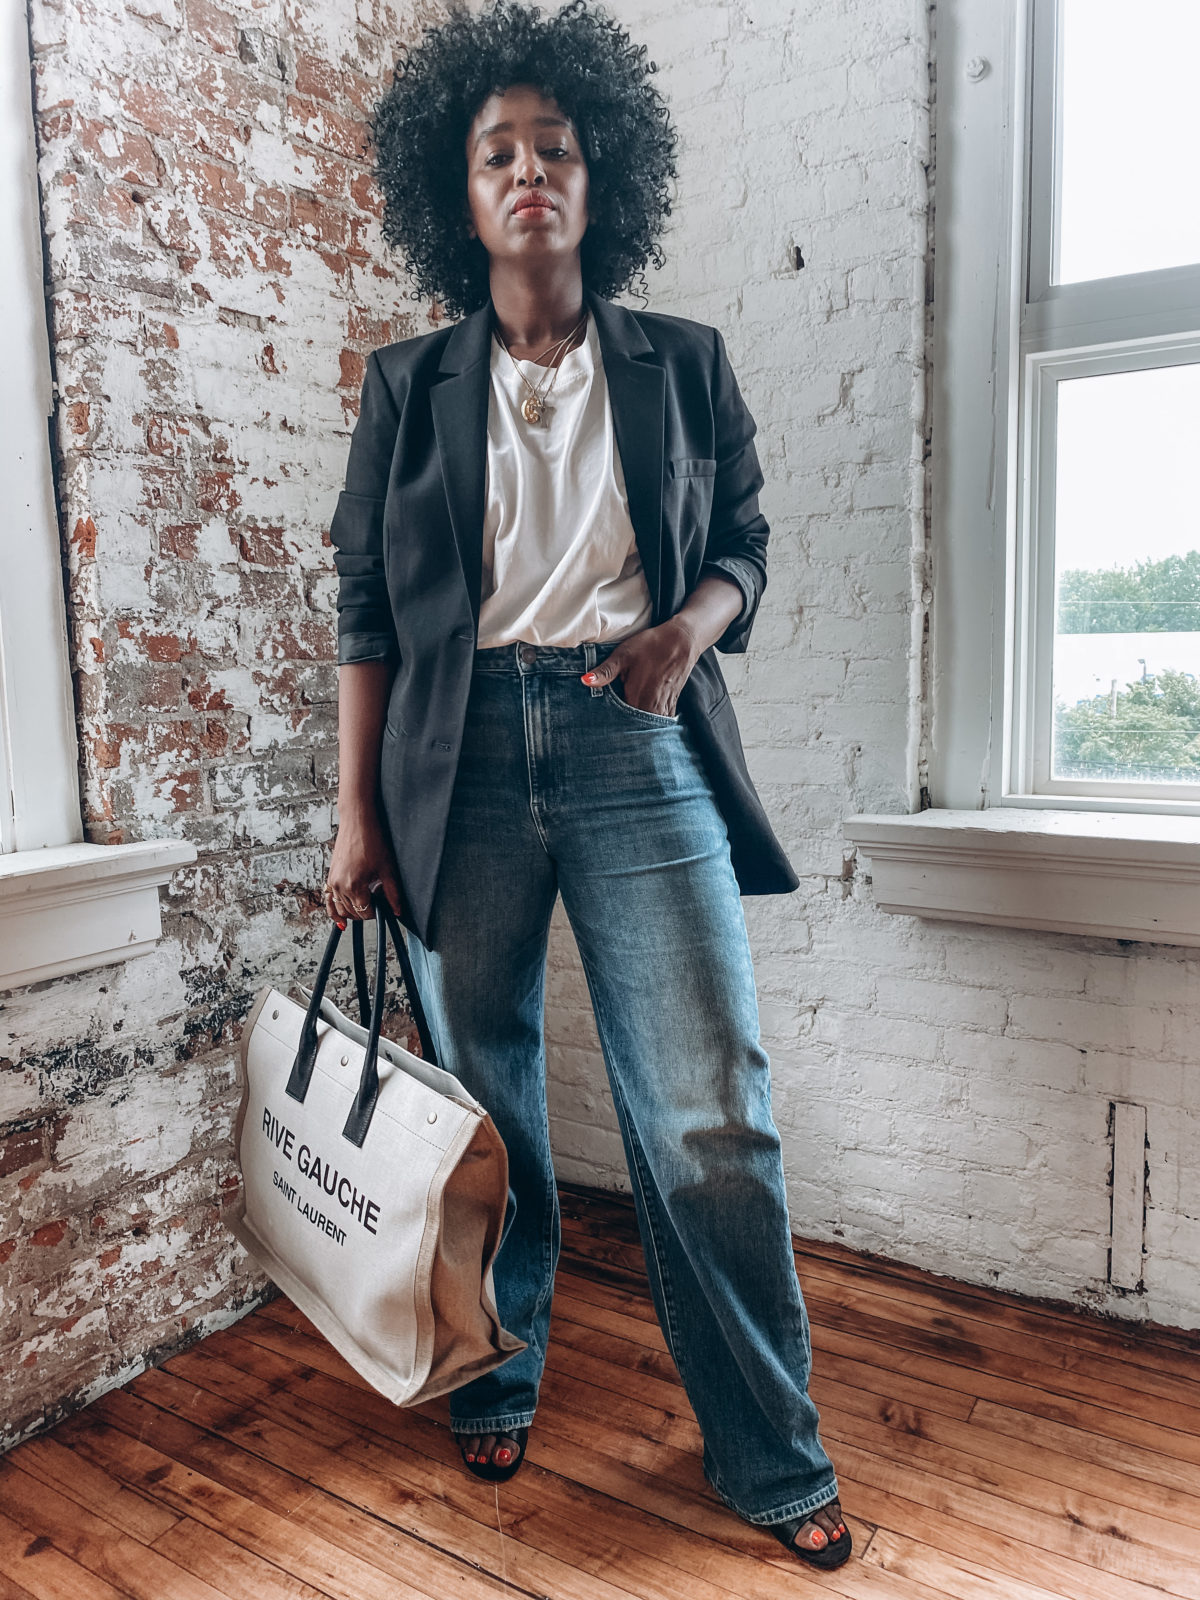 SIX WAYS TO STYLE DENIM - How to Spice up a basic look: The Yusufs